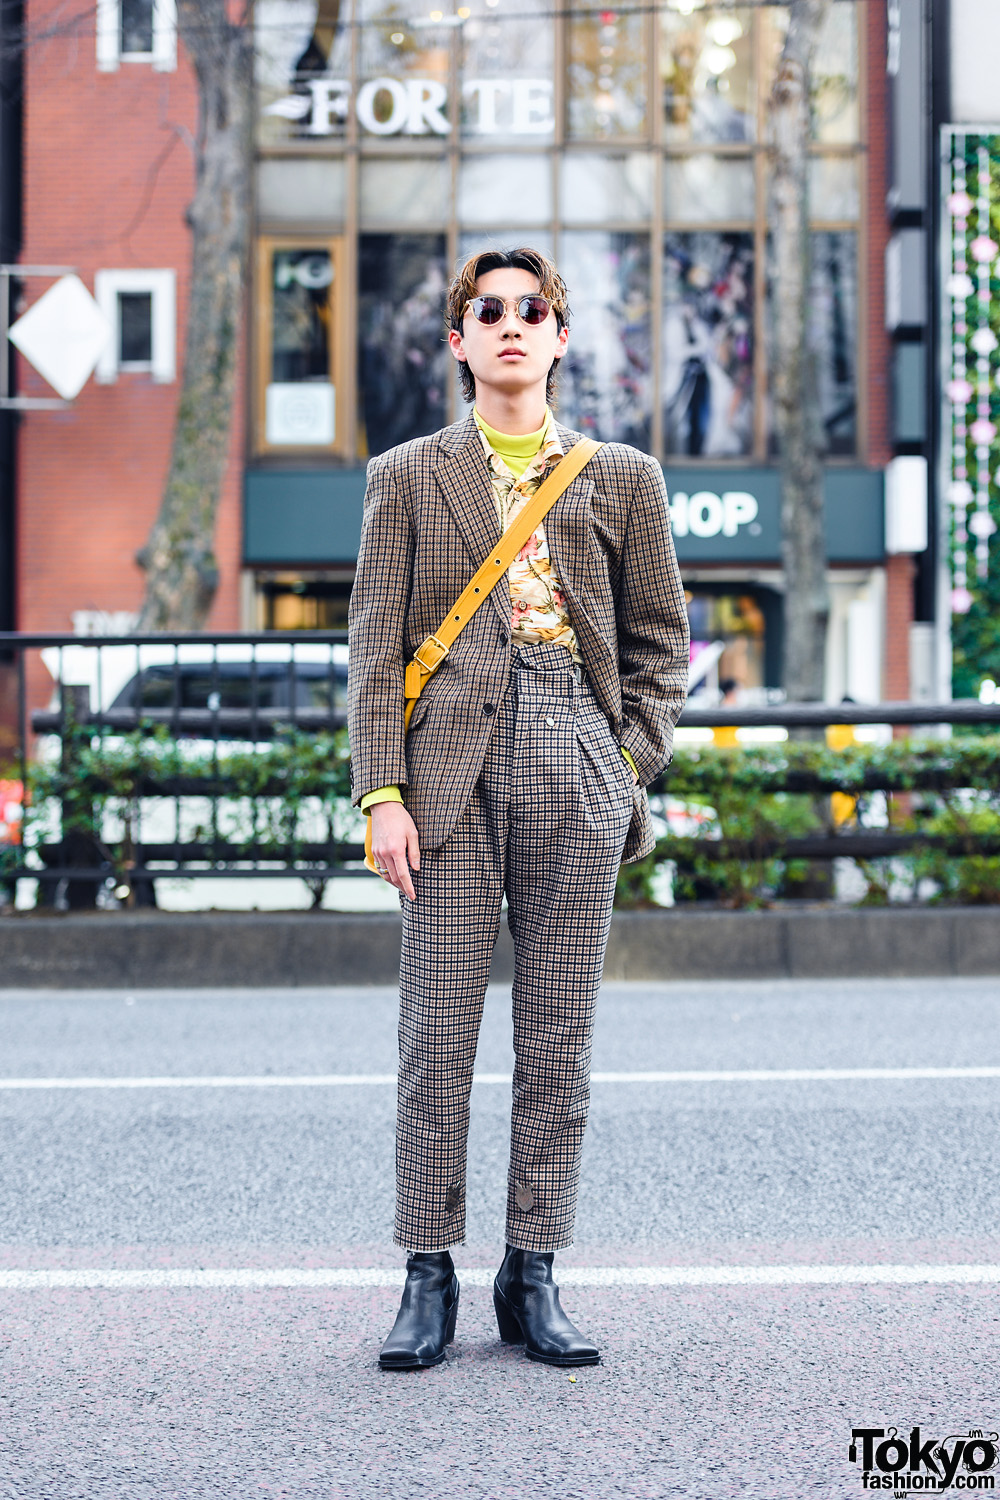 Menswear Street Style w/ Sunglasses, Vintage Rings, Bed JW Ford Checkered Suit, Vintage Coach Bag & Zara Boots